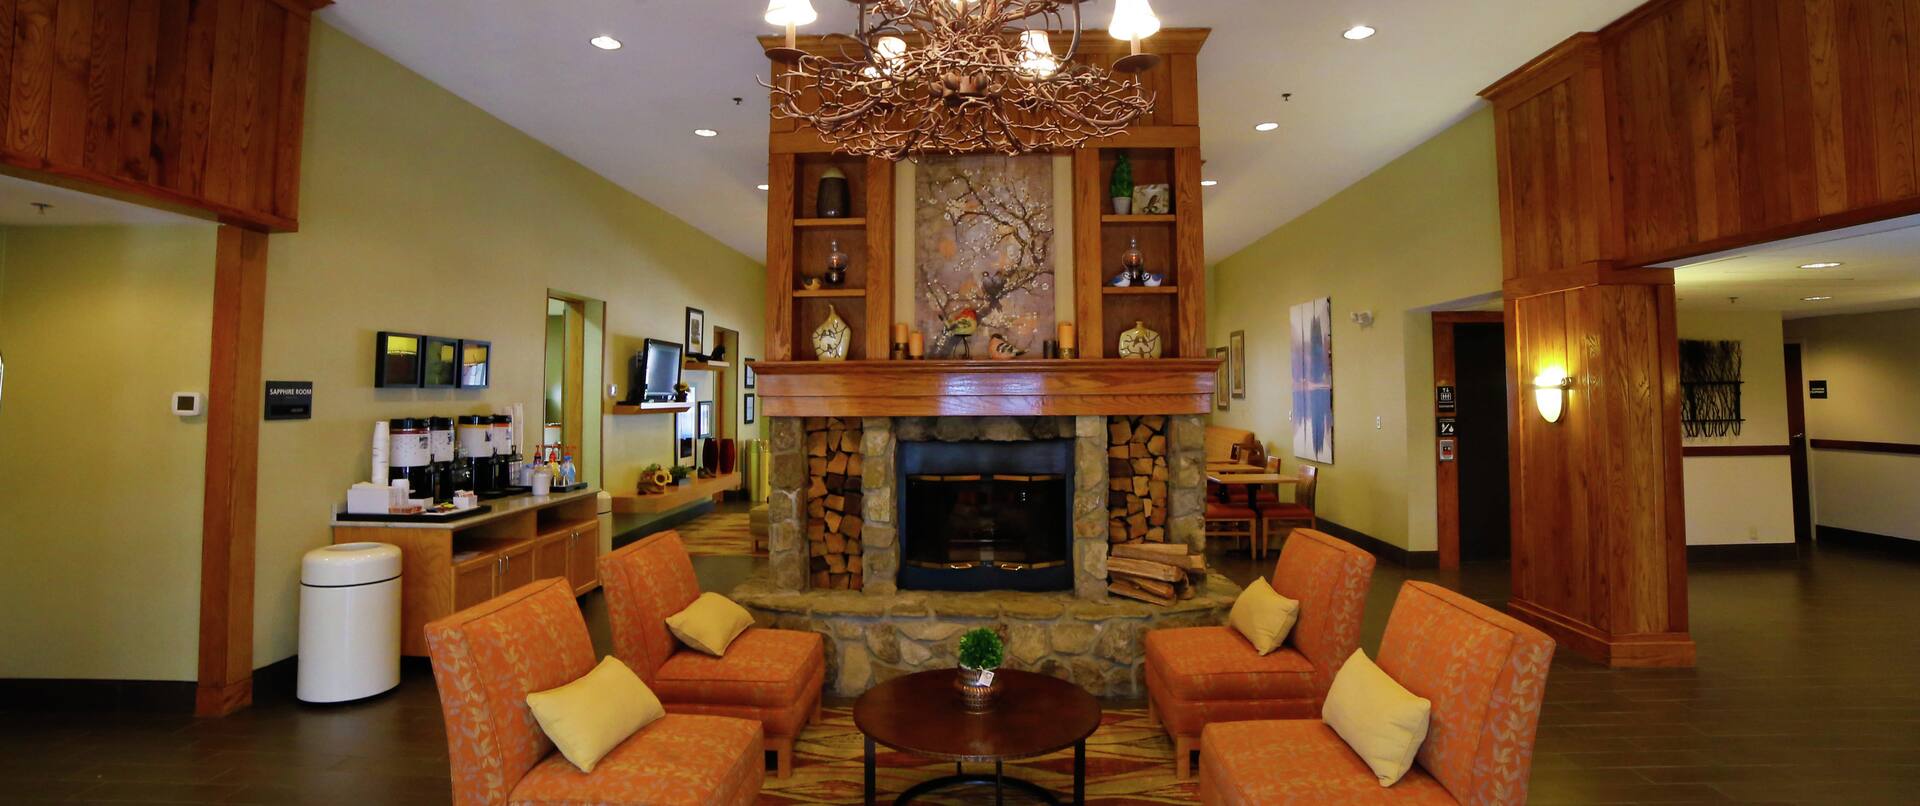 Lobby Seating And Fireplace 